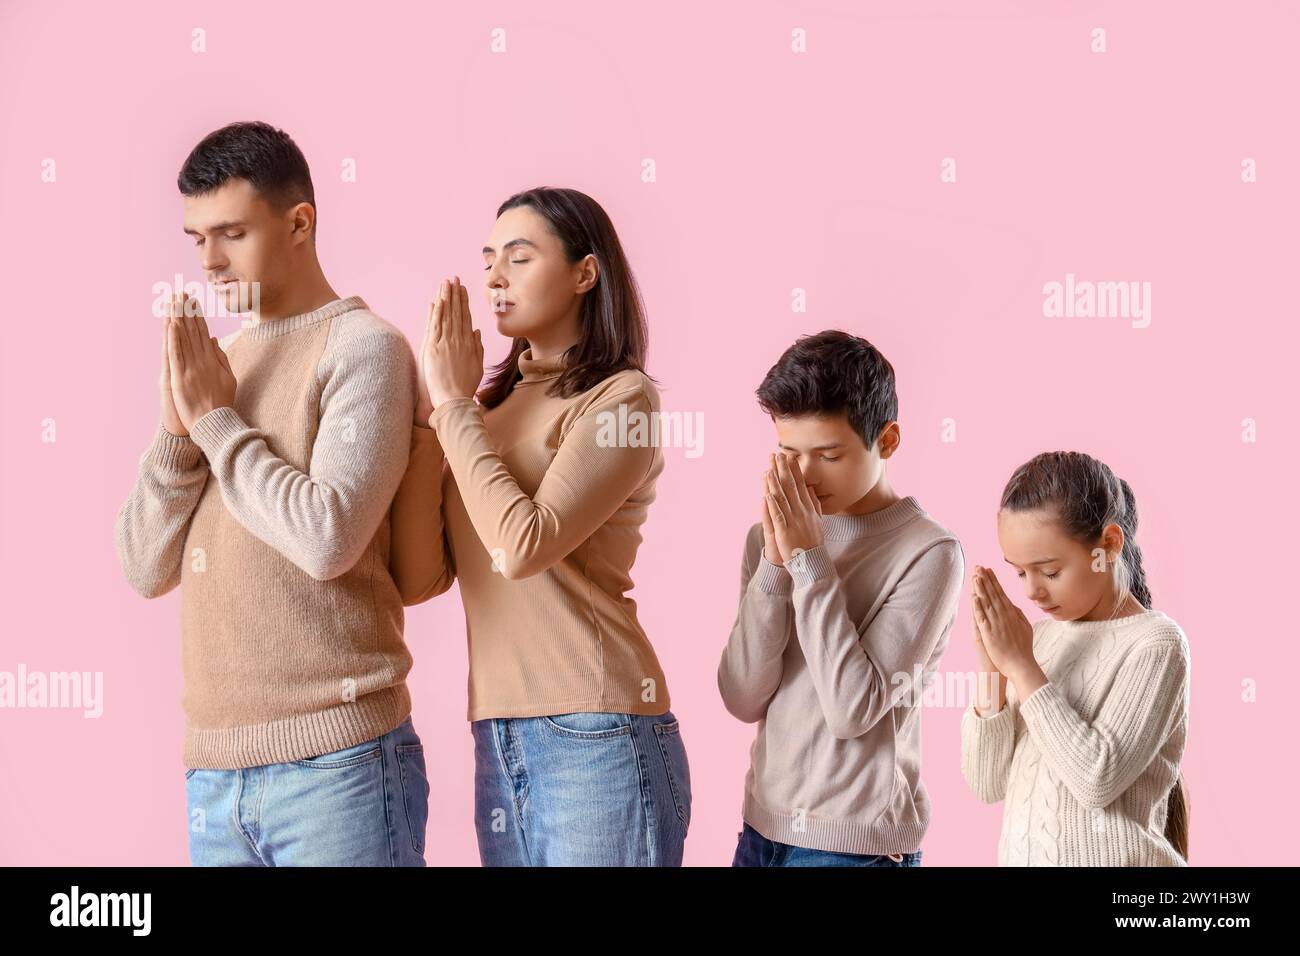 Family praying together on pink background Stock Photo